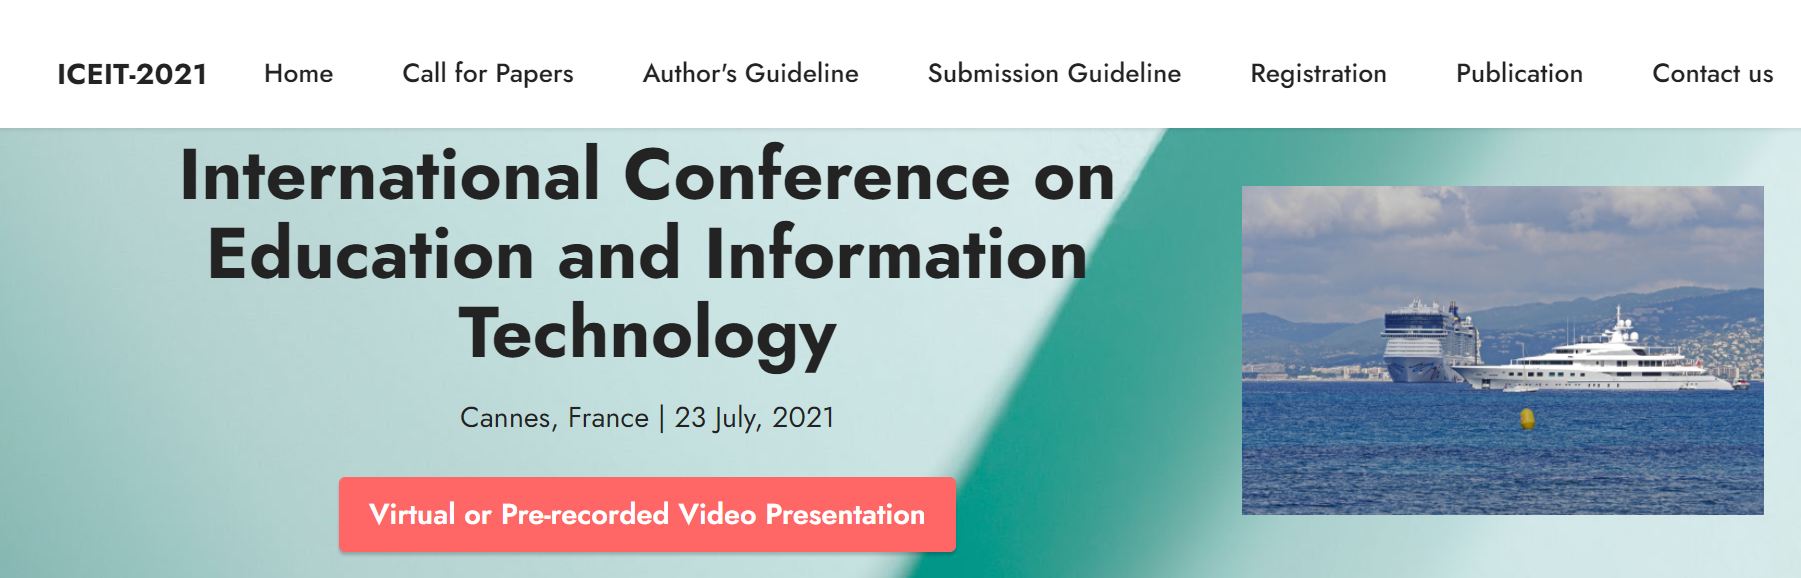 International Conference on Education and Information Technology, Cannes, France, France